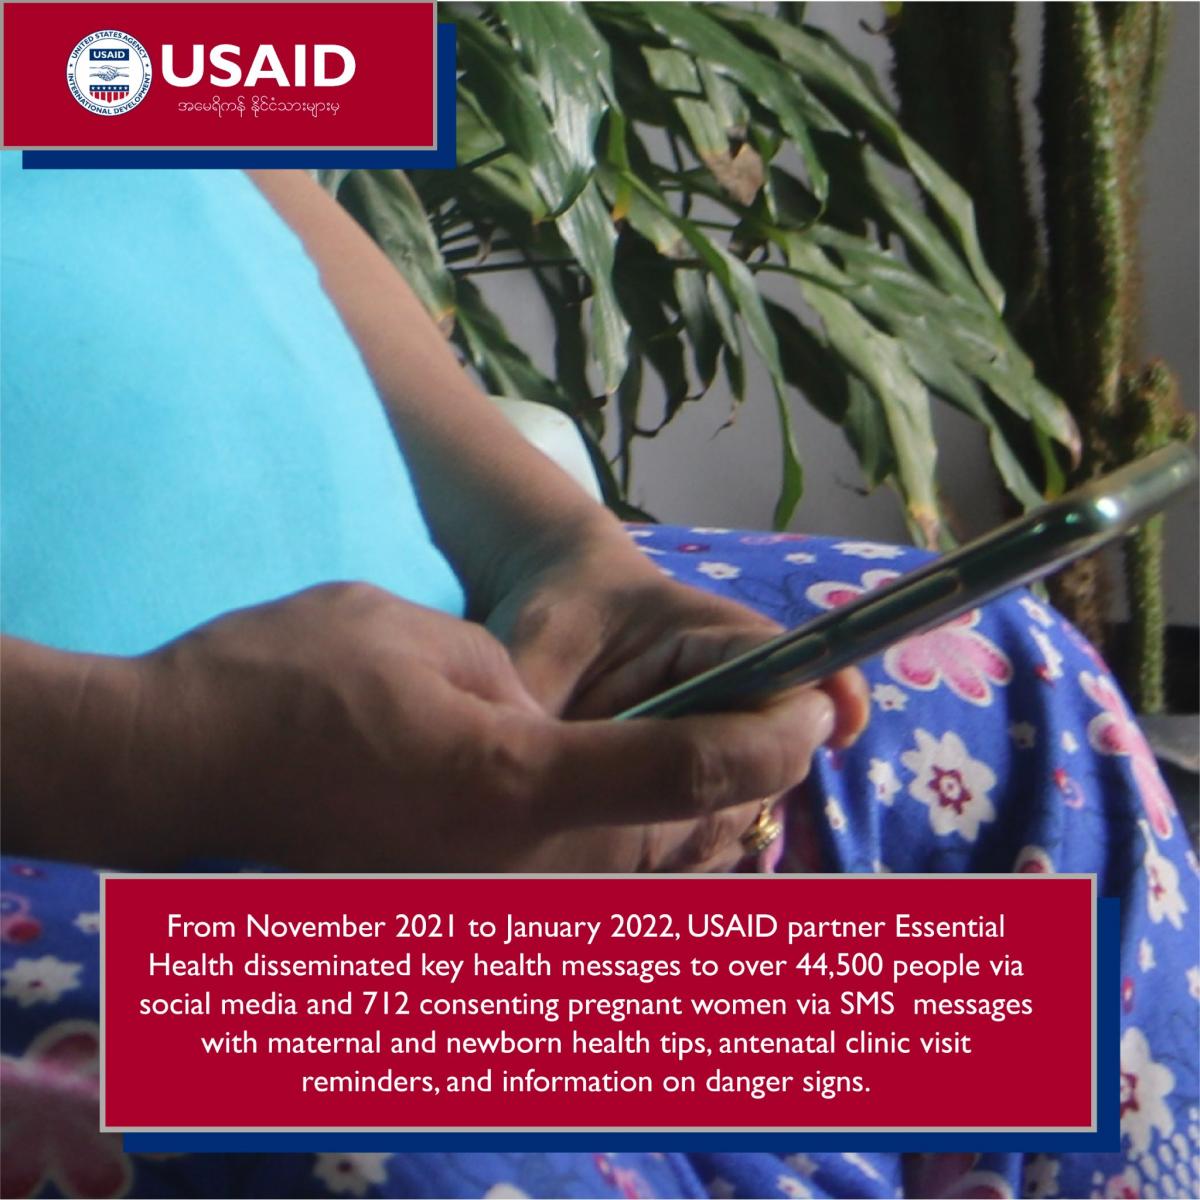 From Nov 2021 to Jan 2022, USAID partner Essential Health disseminated key health messages to over 44,500 people via social media & 712 consenting pregnant women via SMS messages